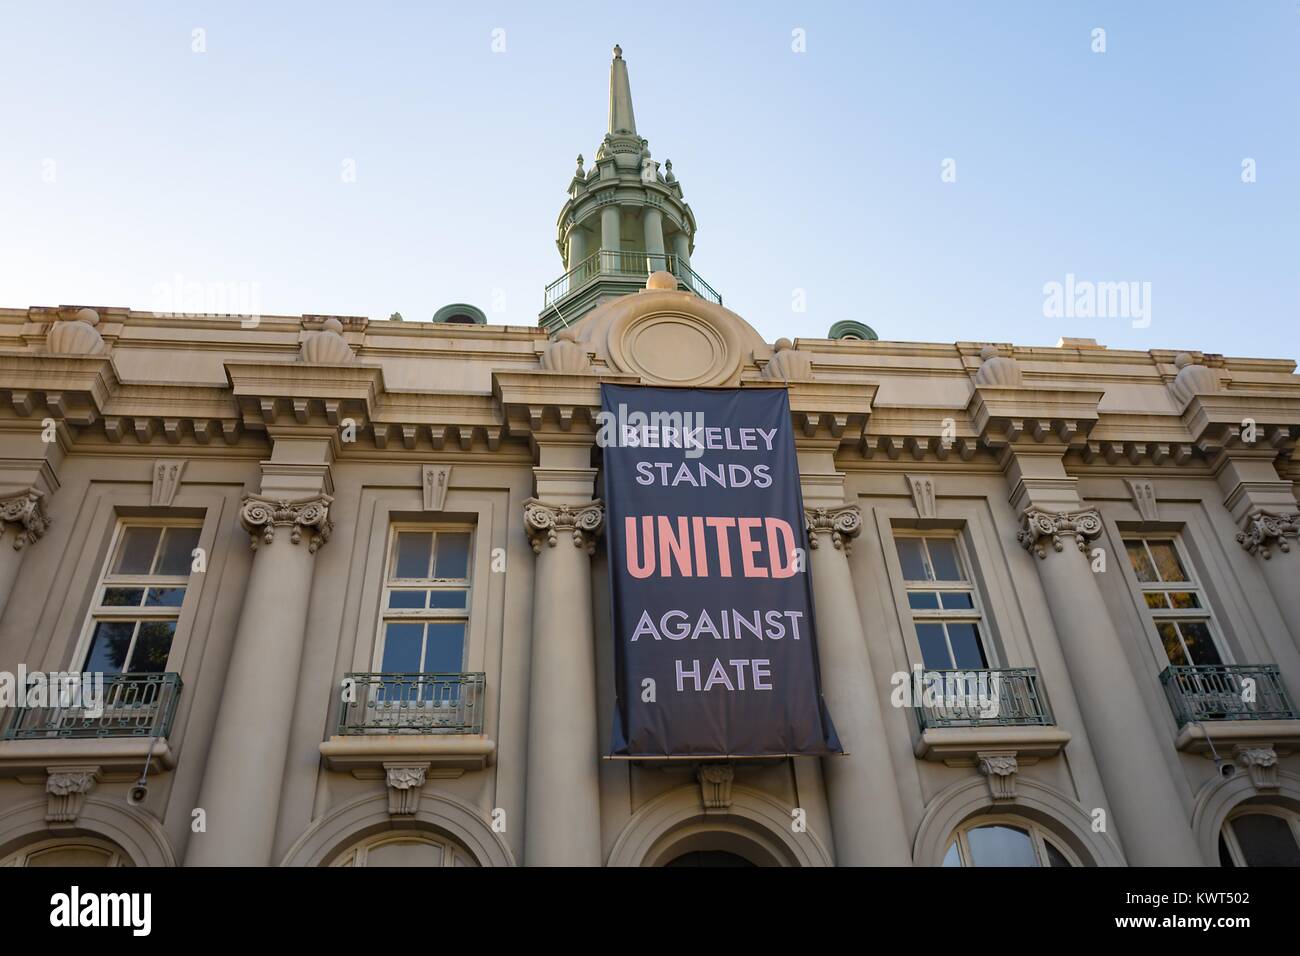 A large banner reading 'Berkeley Stands United Against Hate' hands on the Maudelle Shirek Building (aka Old City Hall) at Martin Luther King Jr Civic Center Park in Berkeley, California, part of a city-led response to 'alt right' organizations' 'anti Marxist' protests in the city, October 6, 2017. () Stock Photo